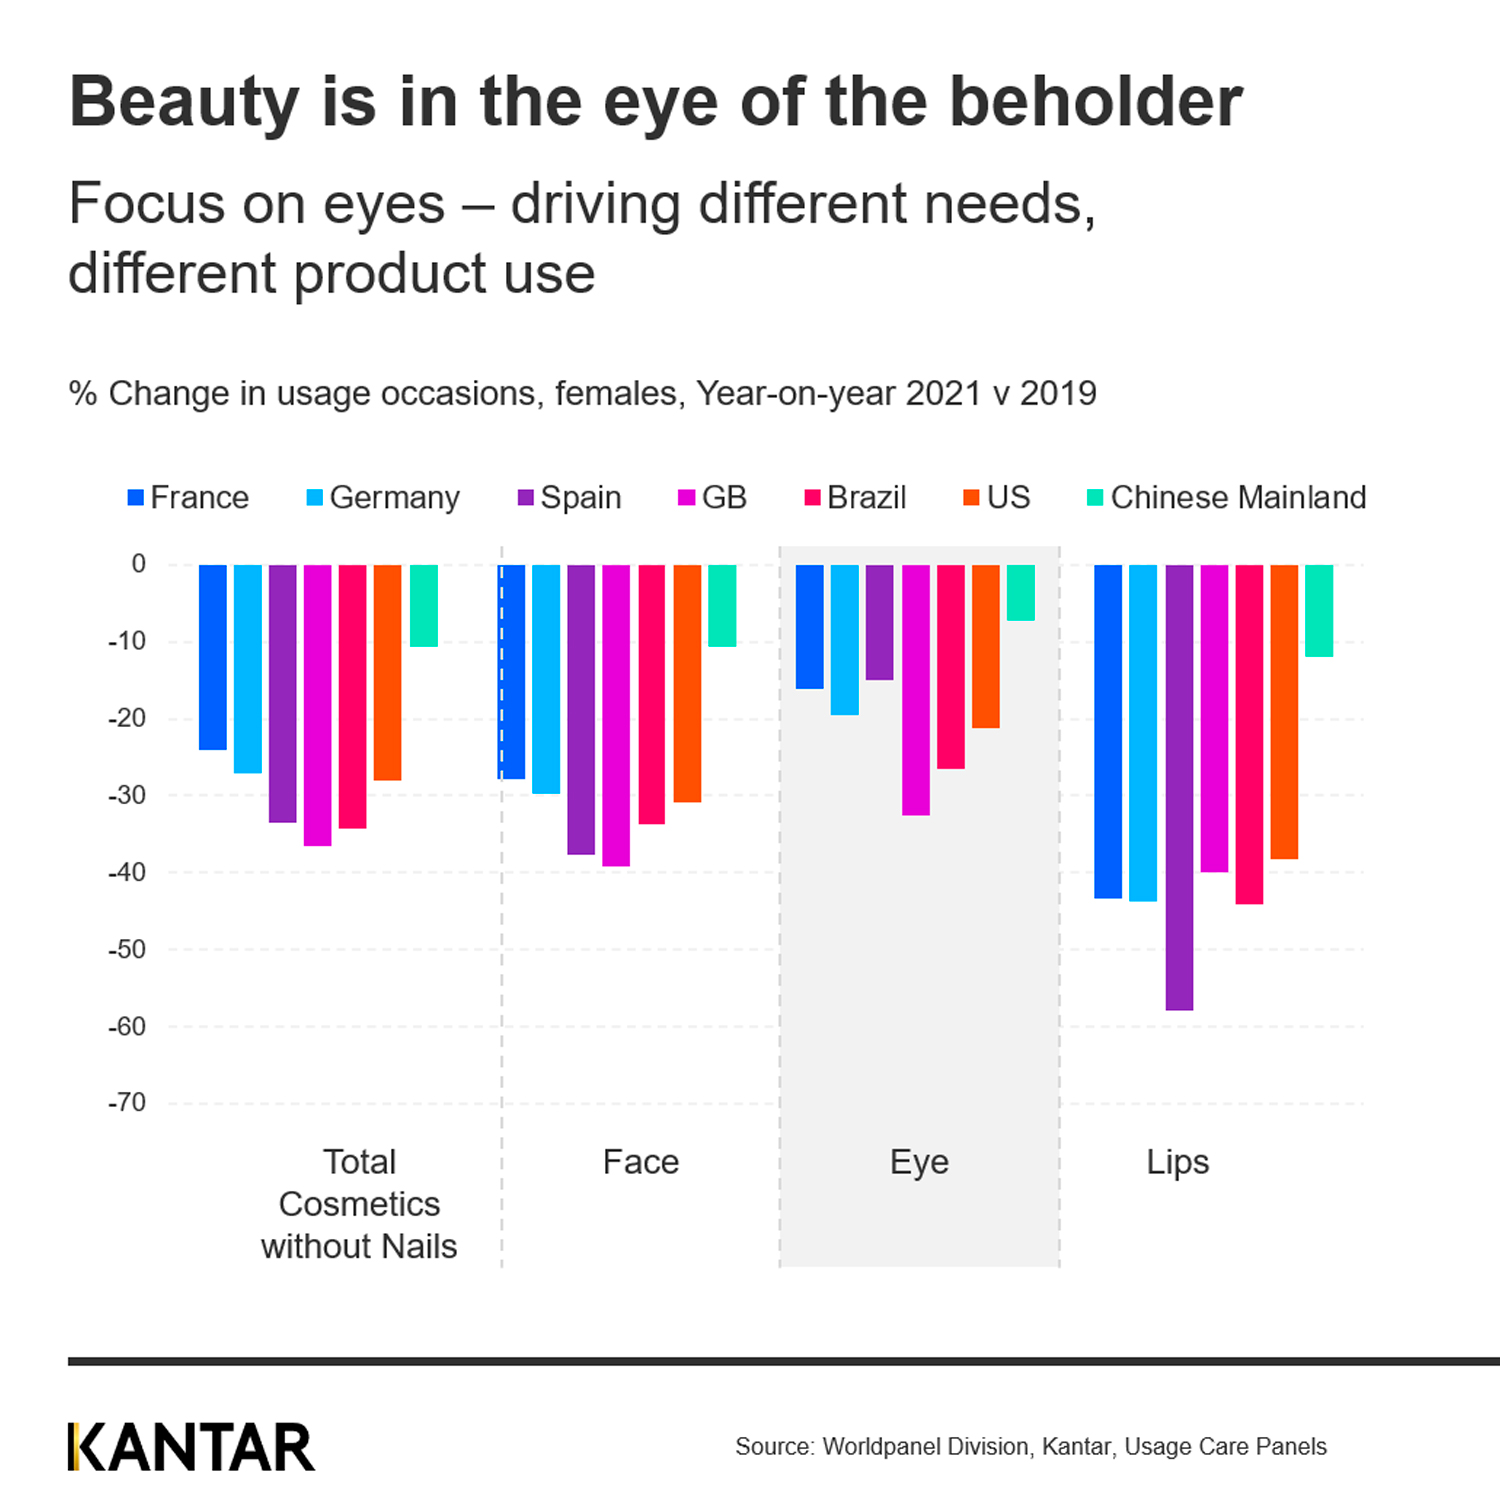 Less is more: How the pandemic shifted the Beauty market